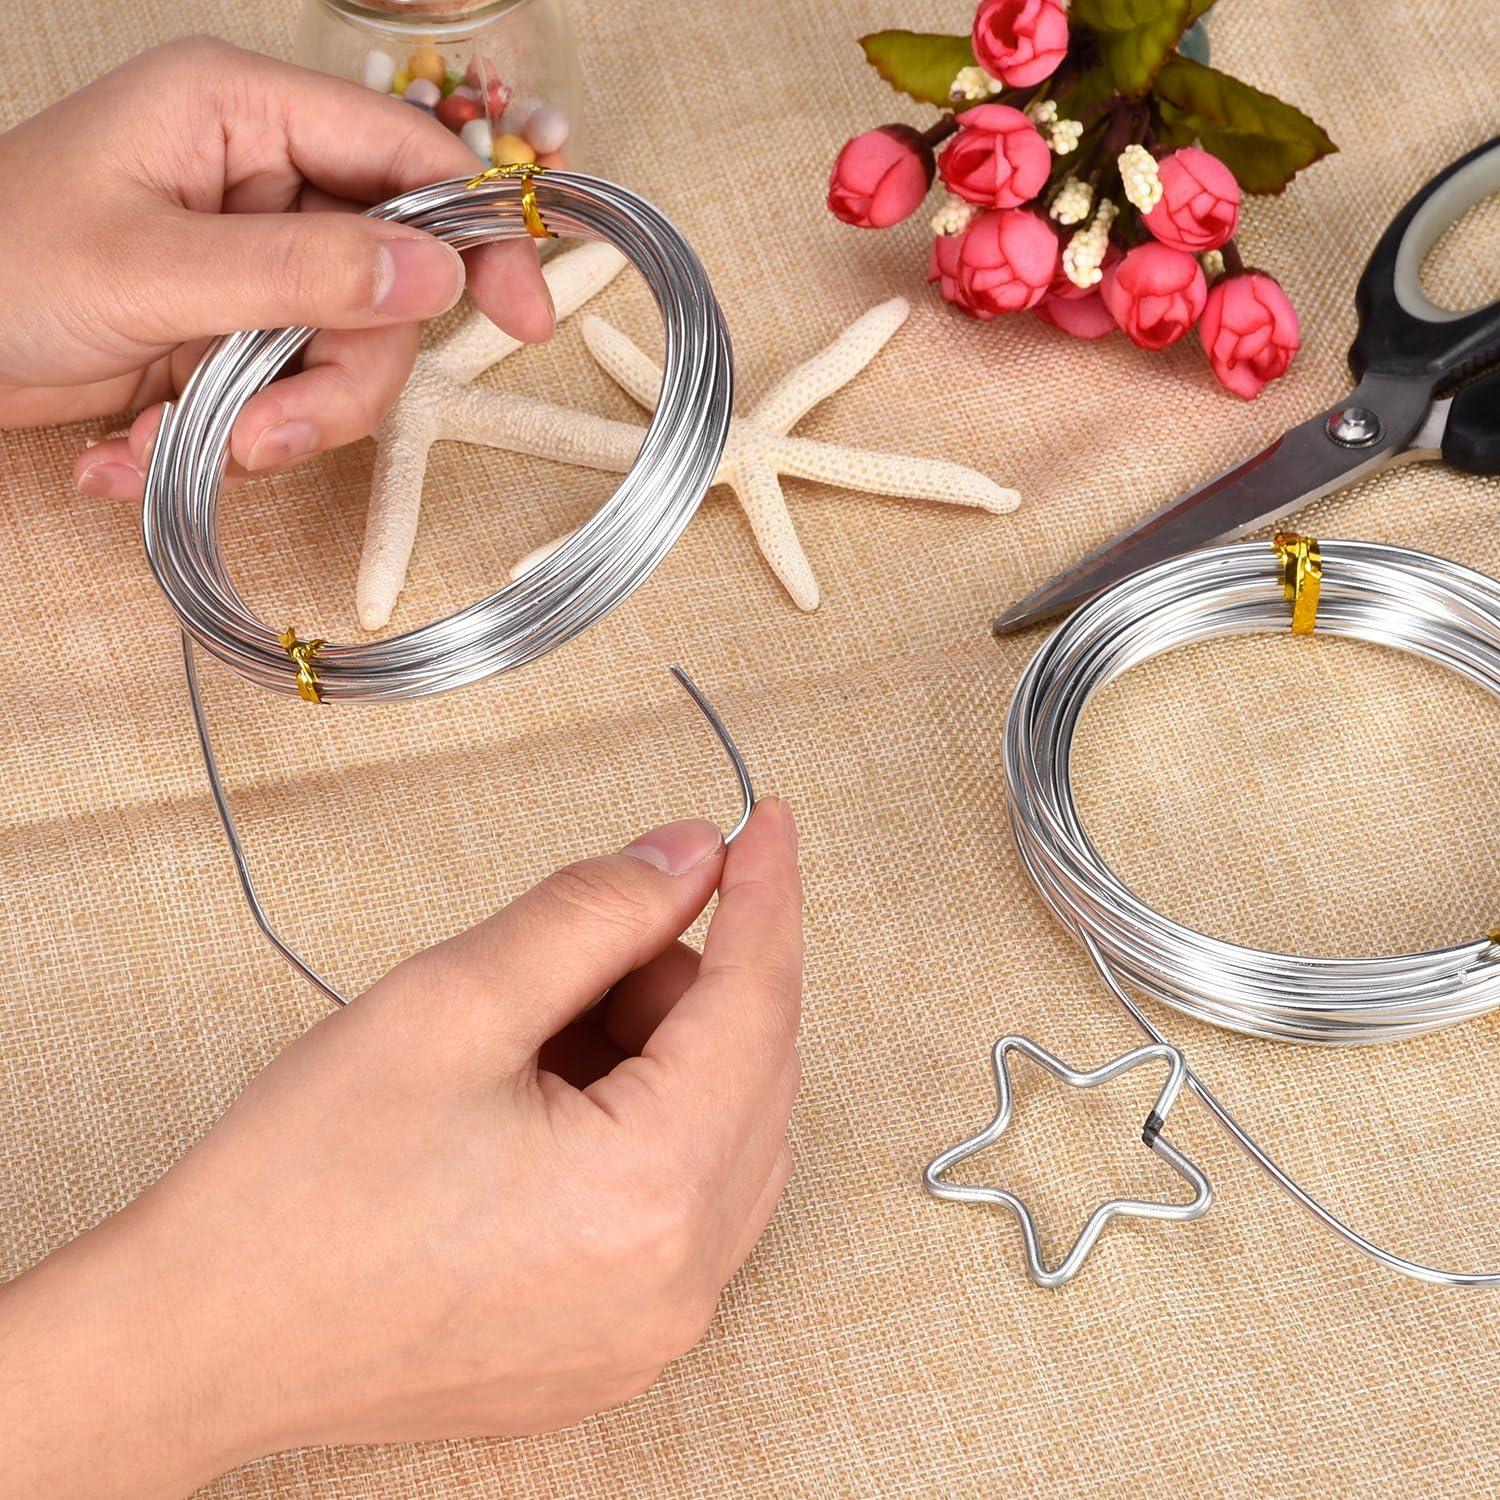 BBTO Aluminum Craft Wire 4 Sizes (1 mm 1.5 mm 2 mm and 2.5 mm in